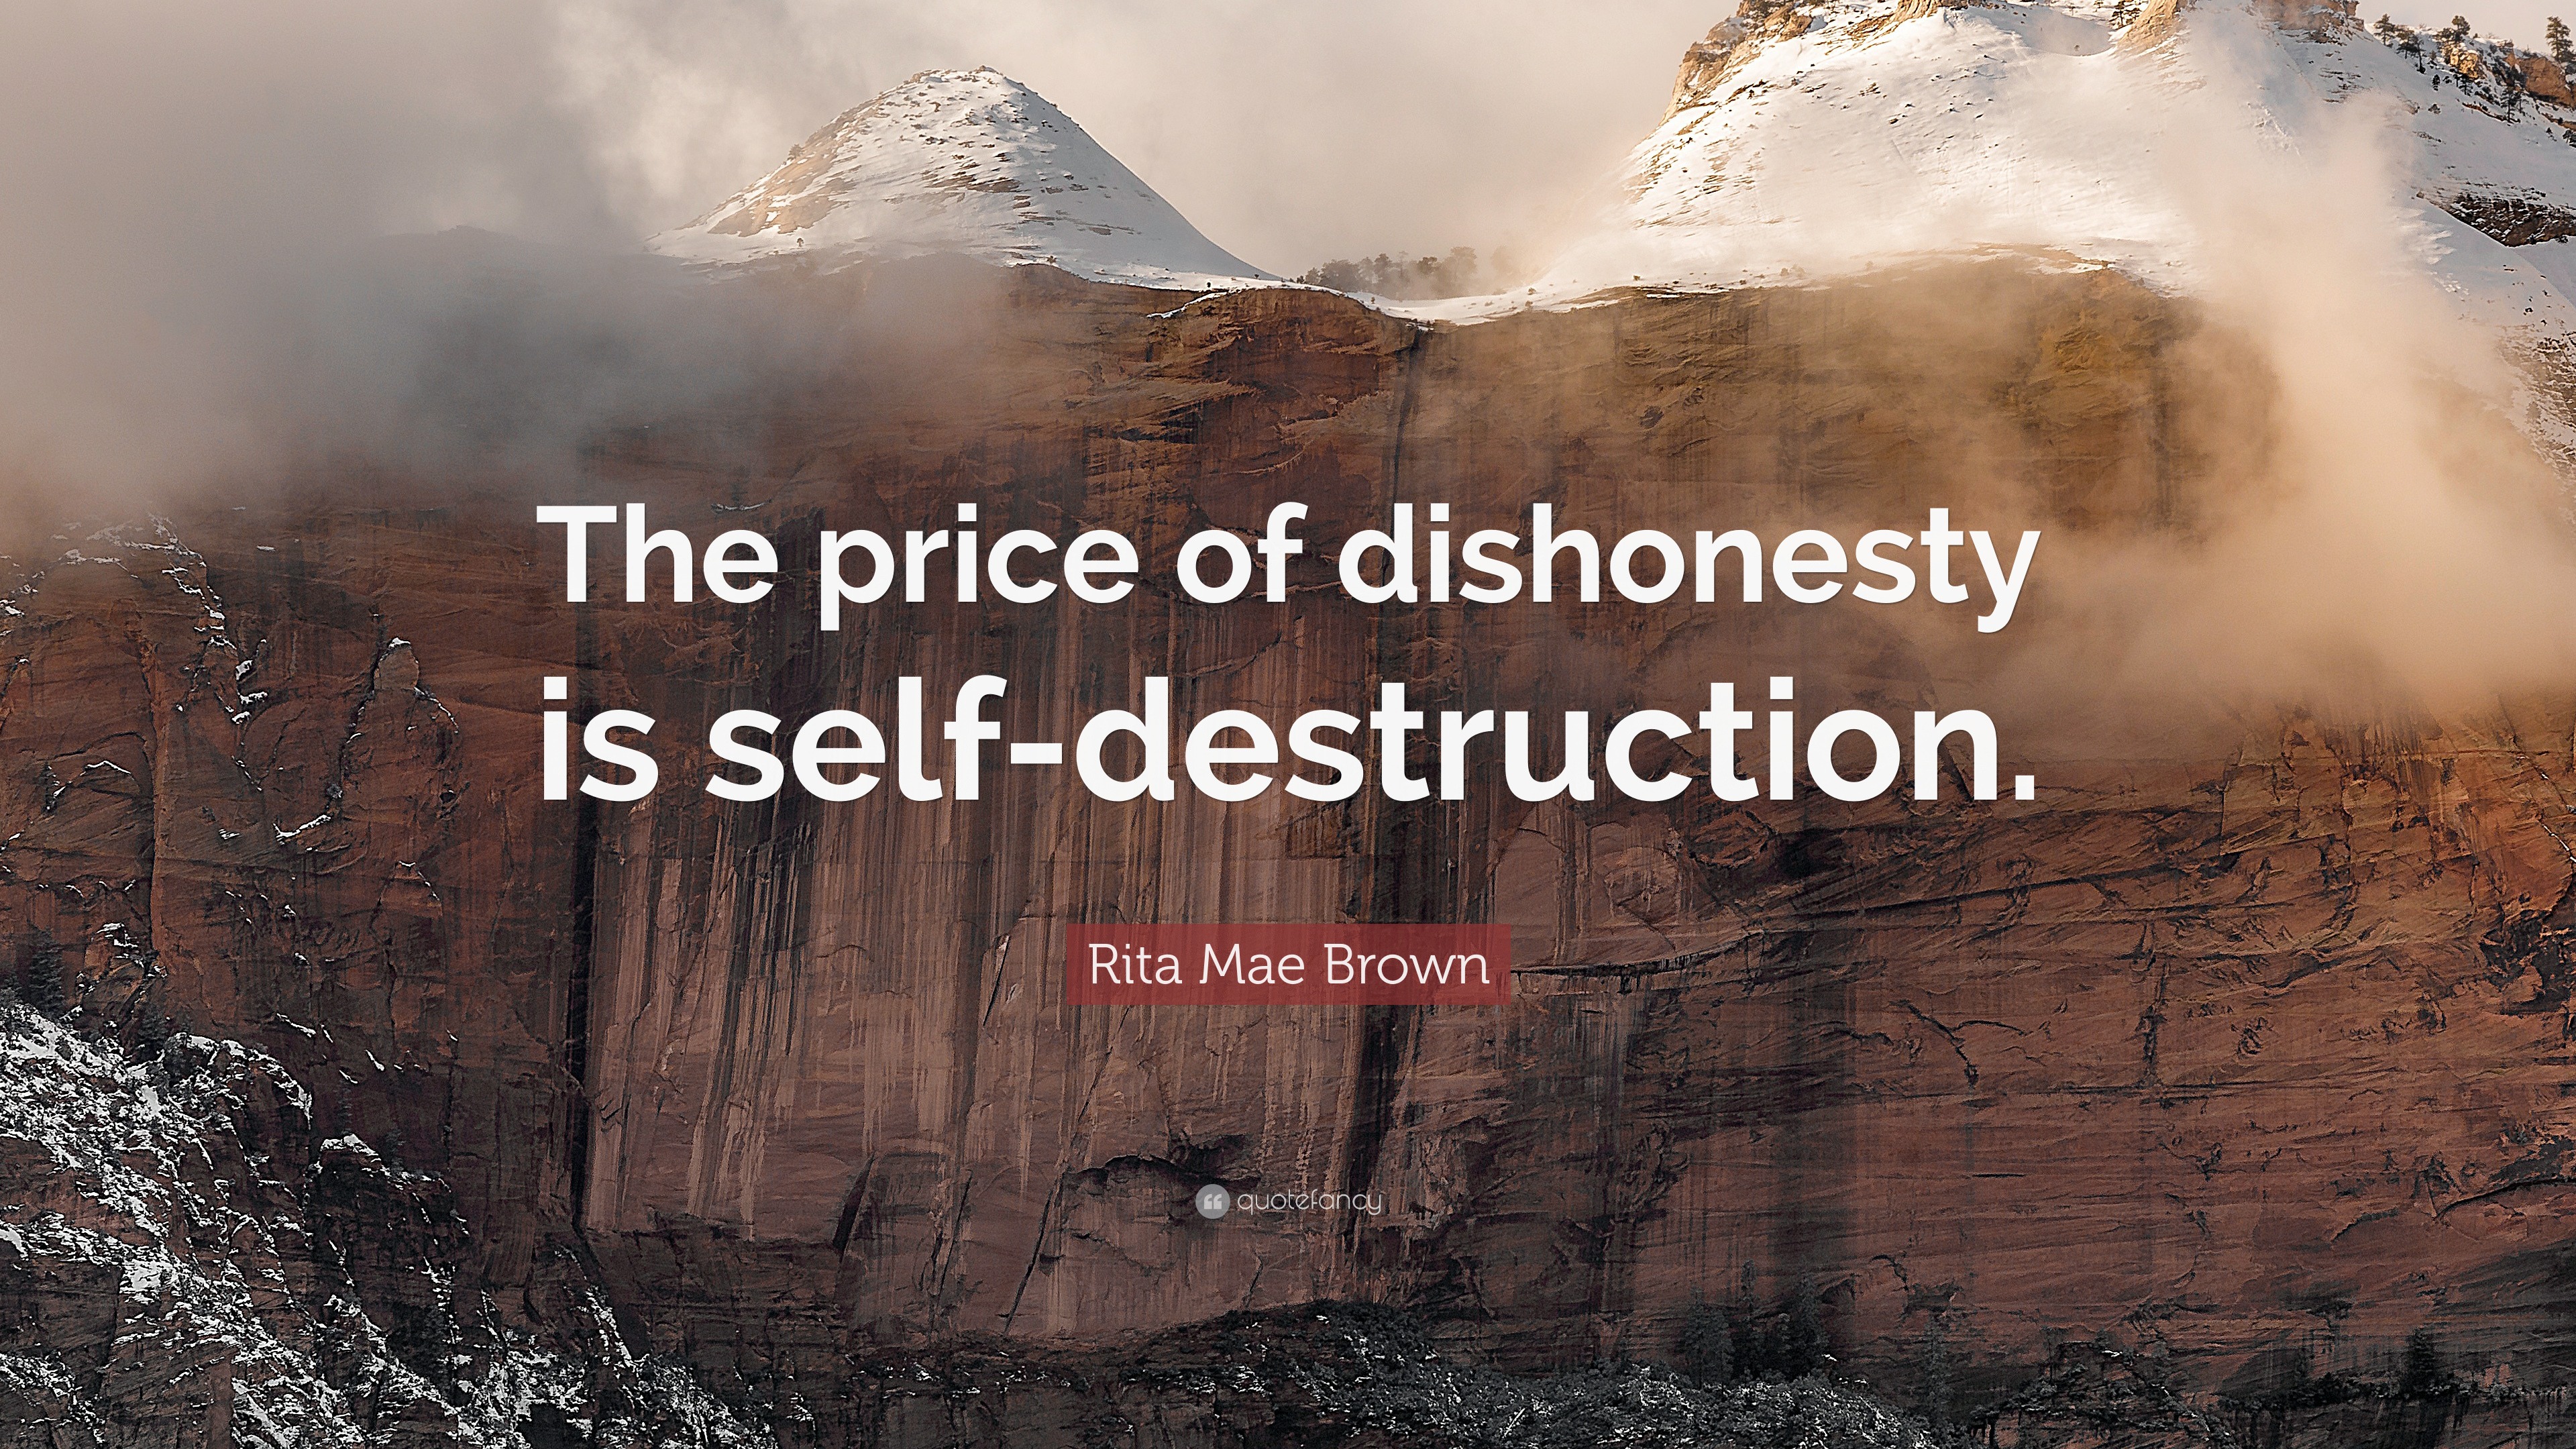 Rita Mae Brown Quote: “The price of dishonesty is self-destruction.” (6